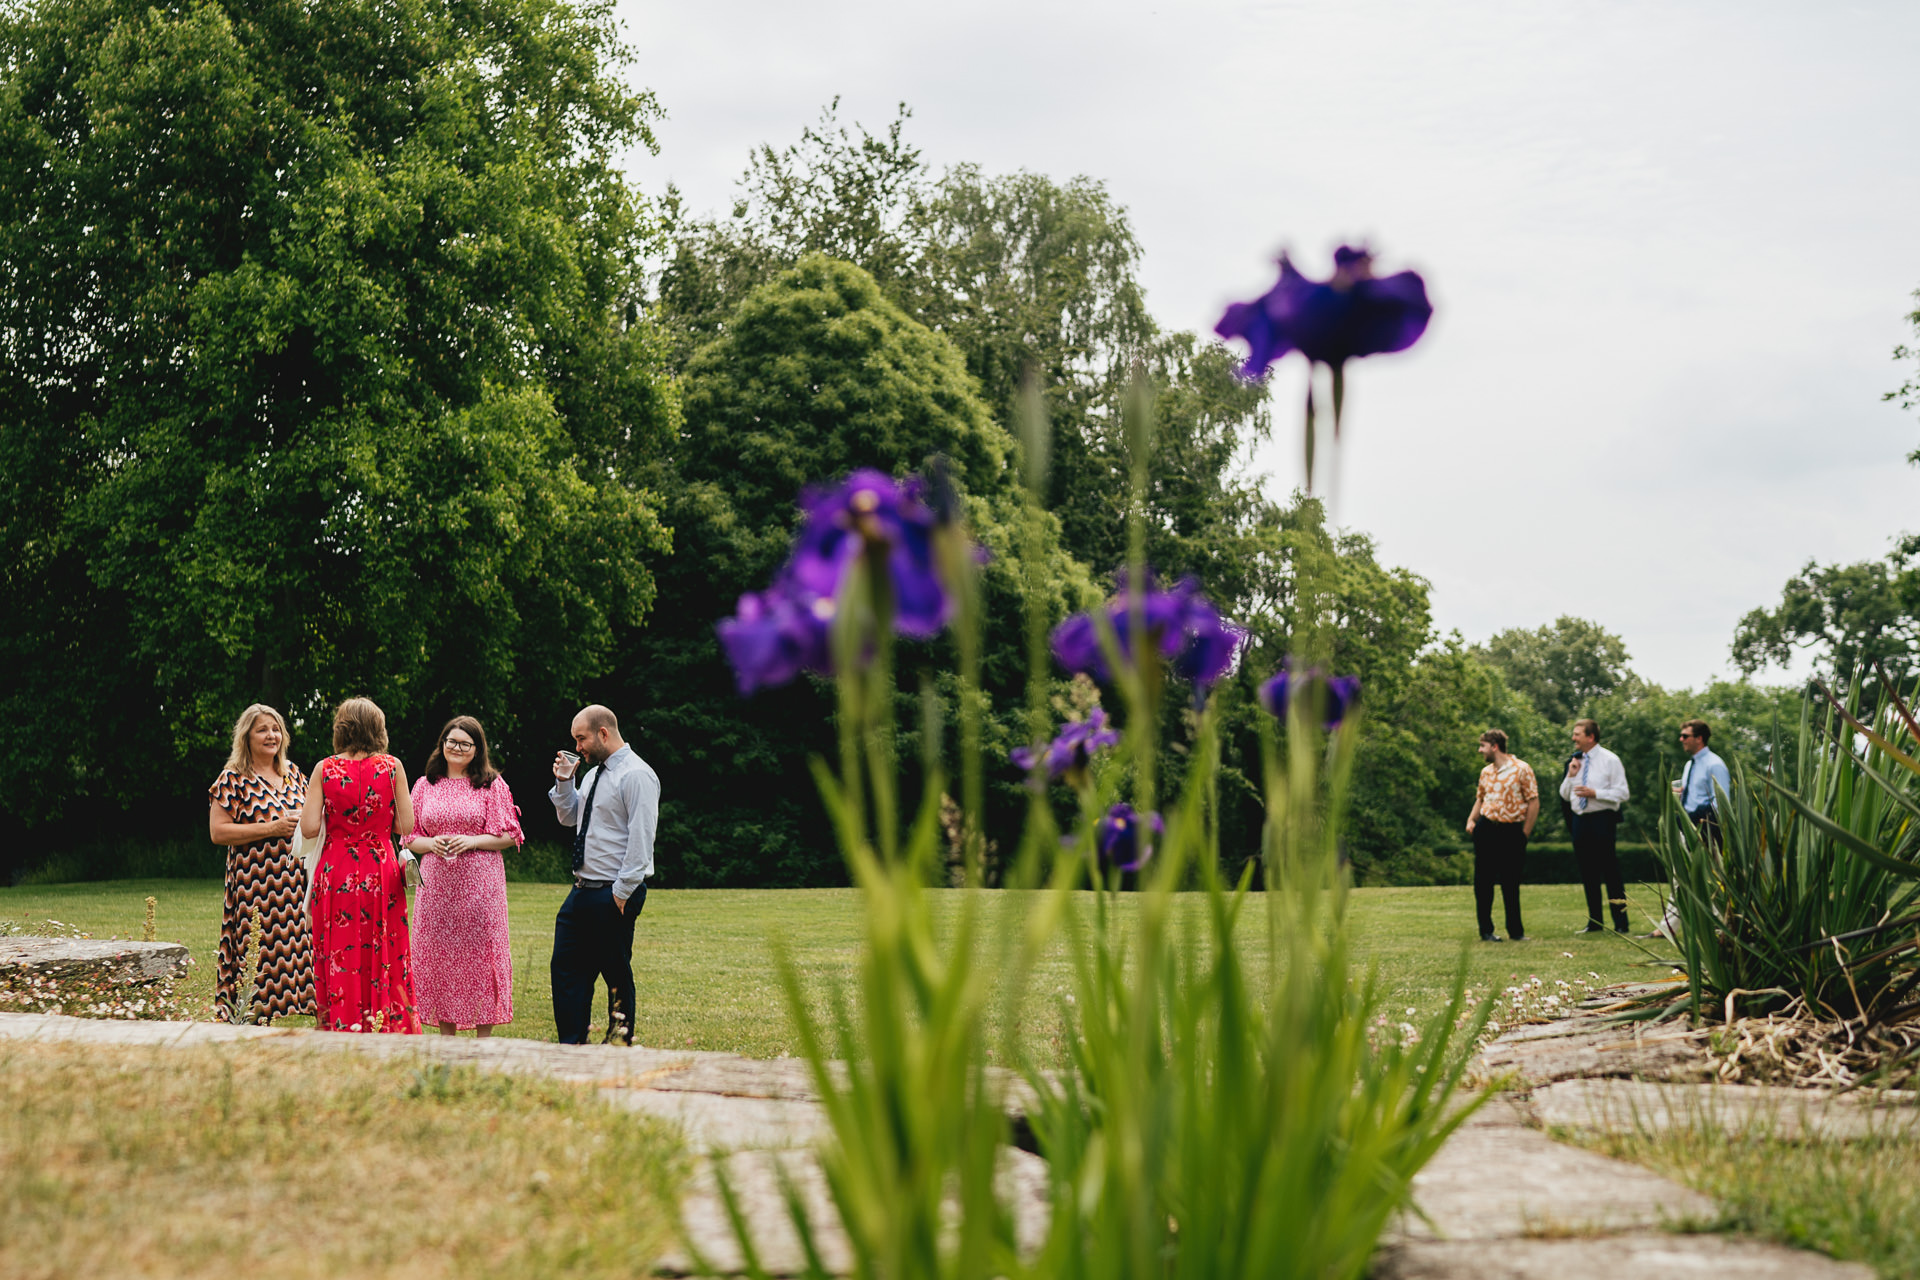 Wedding guests chatting in the gardens at Hestercombe